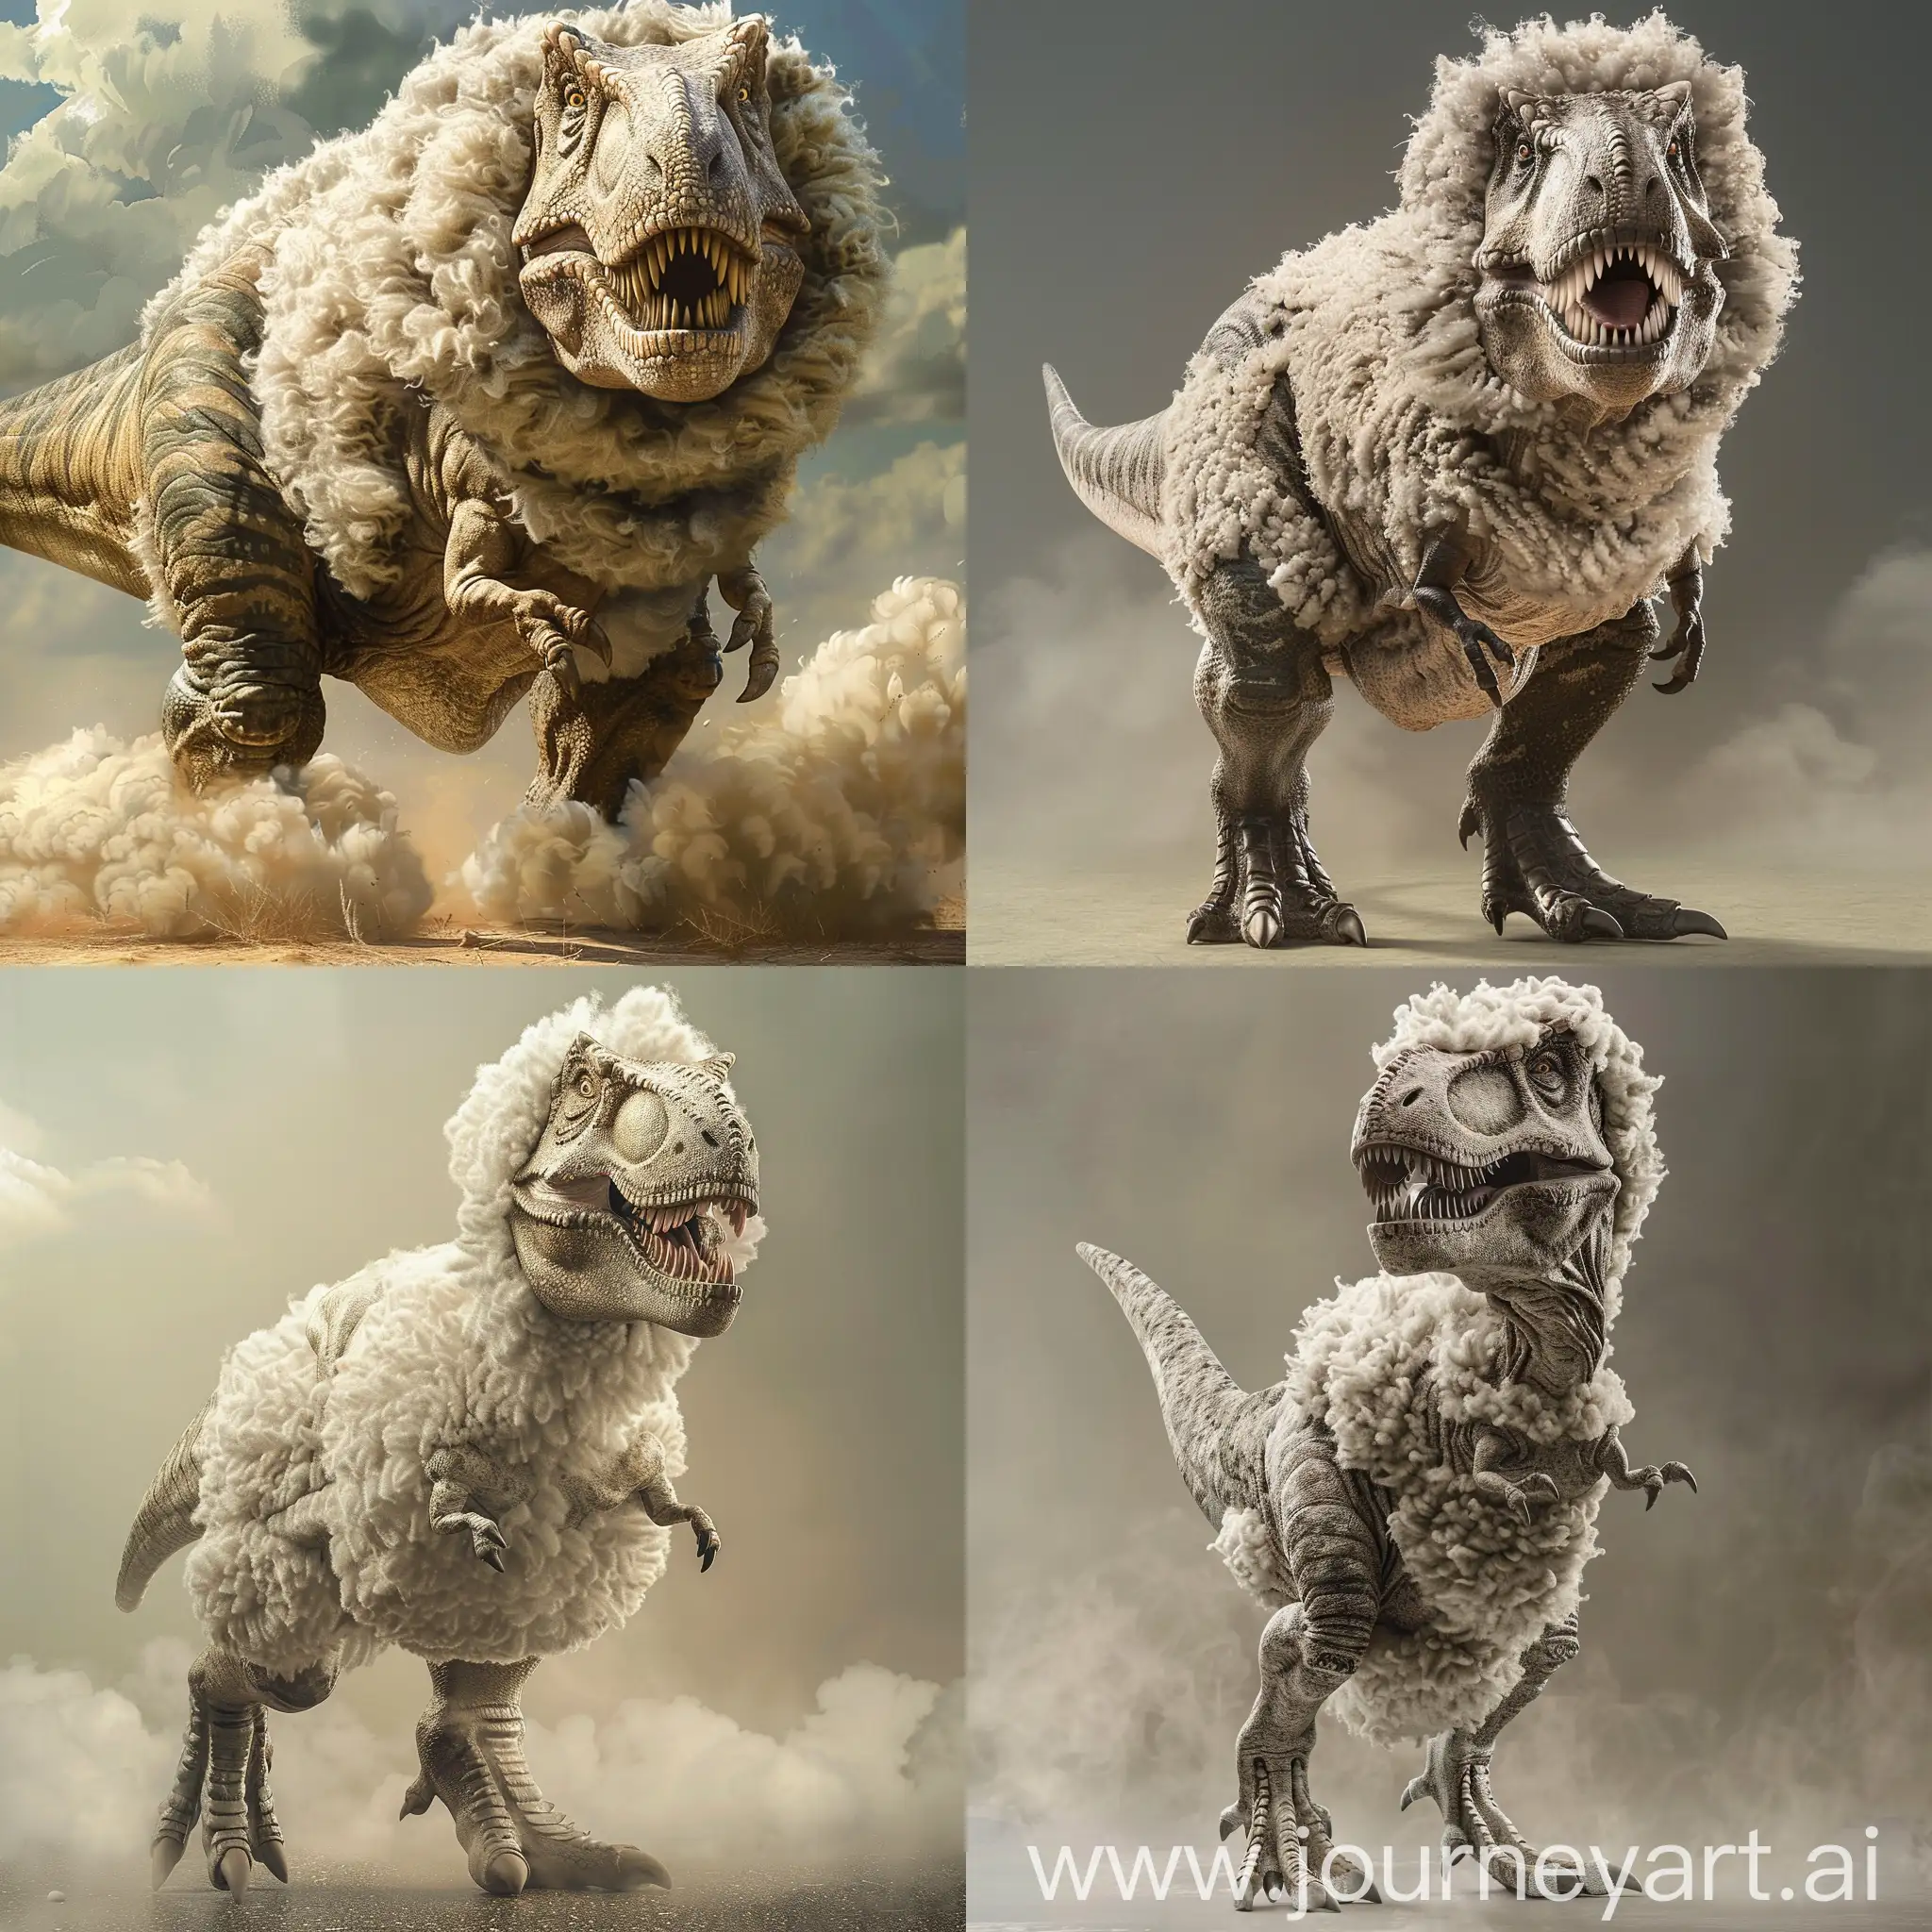 a t-rex with its whole body including head, mouth and arms and legs etc. covered by fur and looks like a sheep